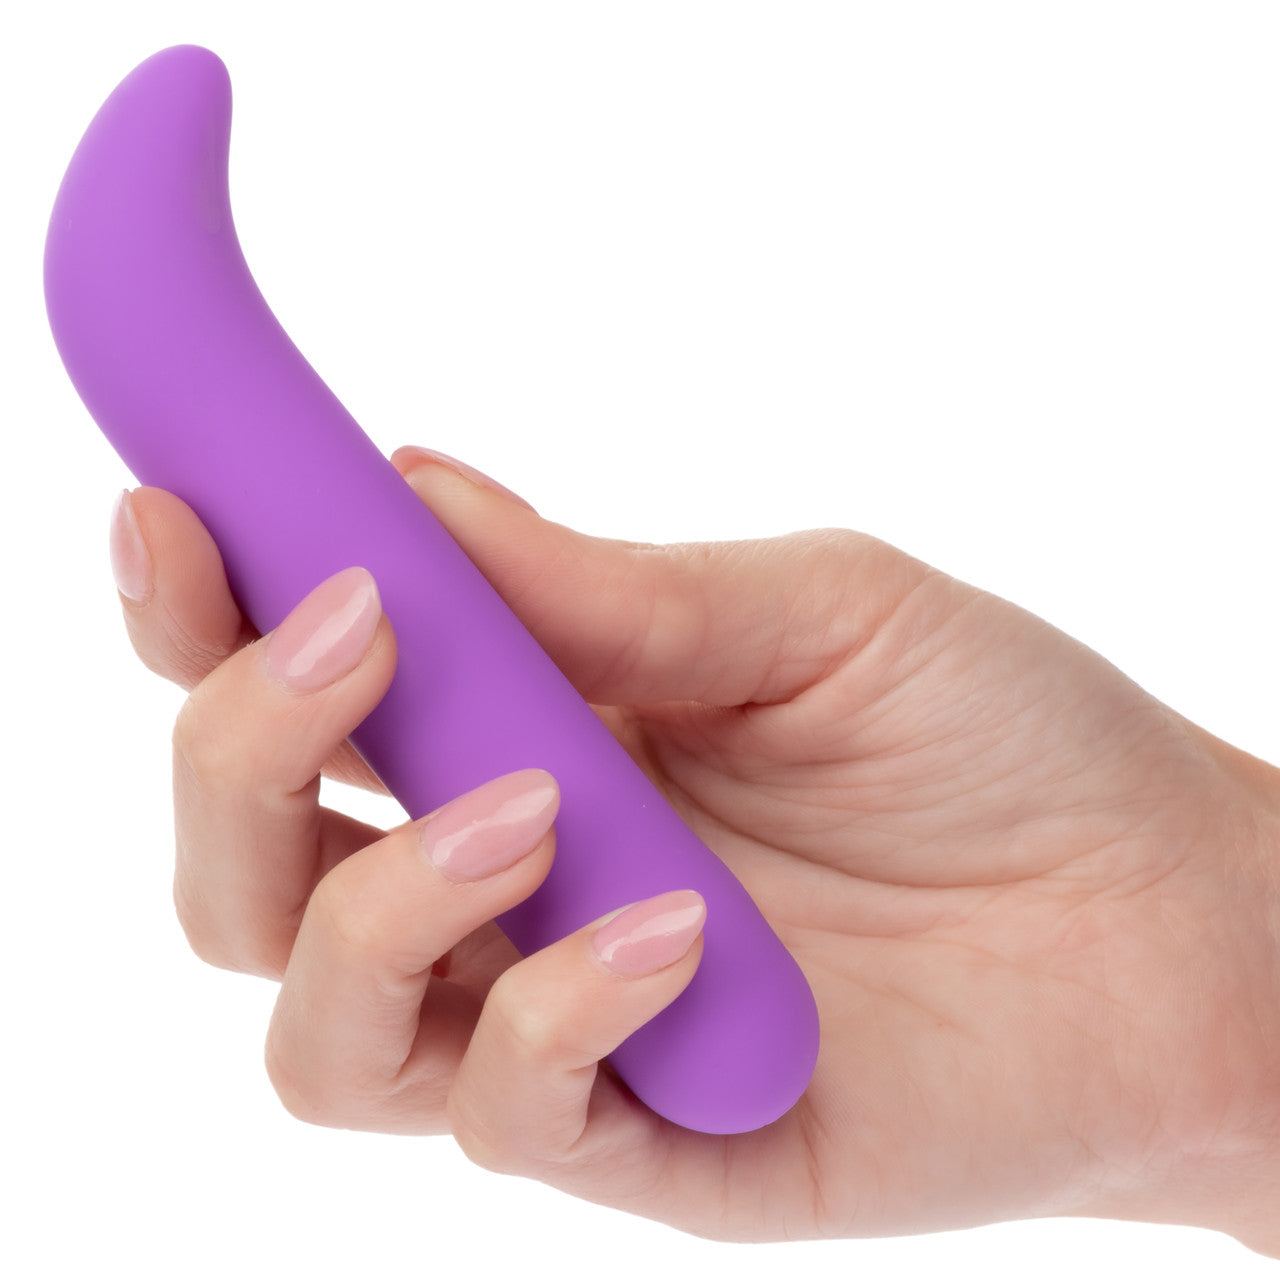 Bliss Liquid Silicone Mini G Vibe - Thorn & Feather